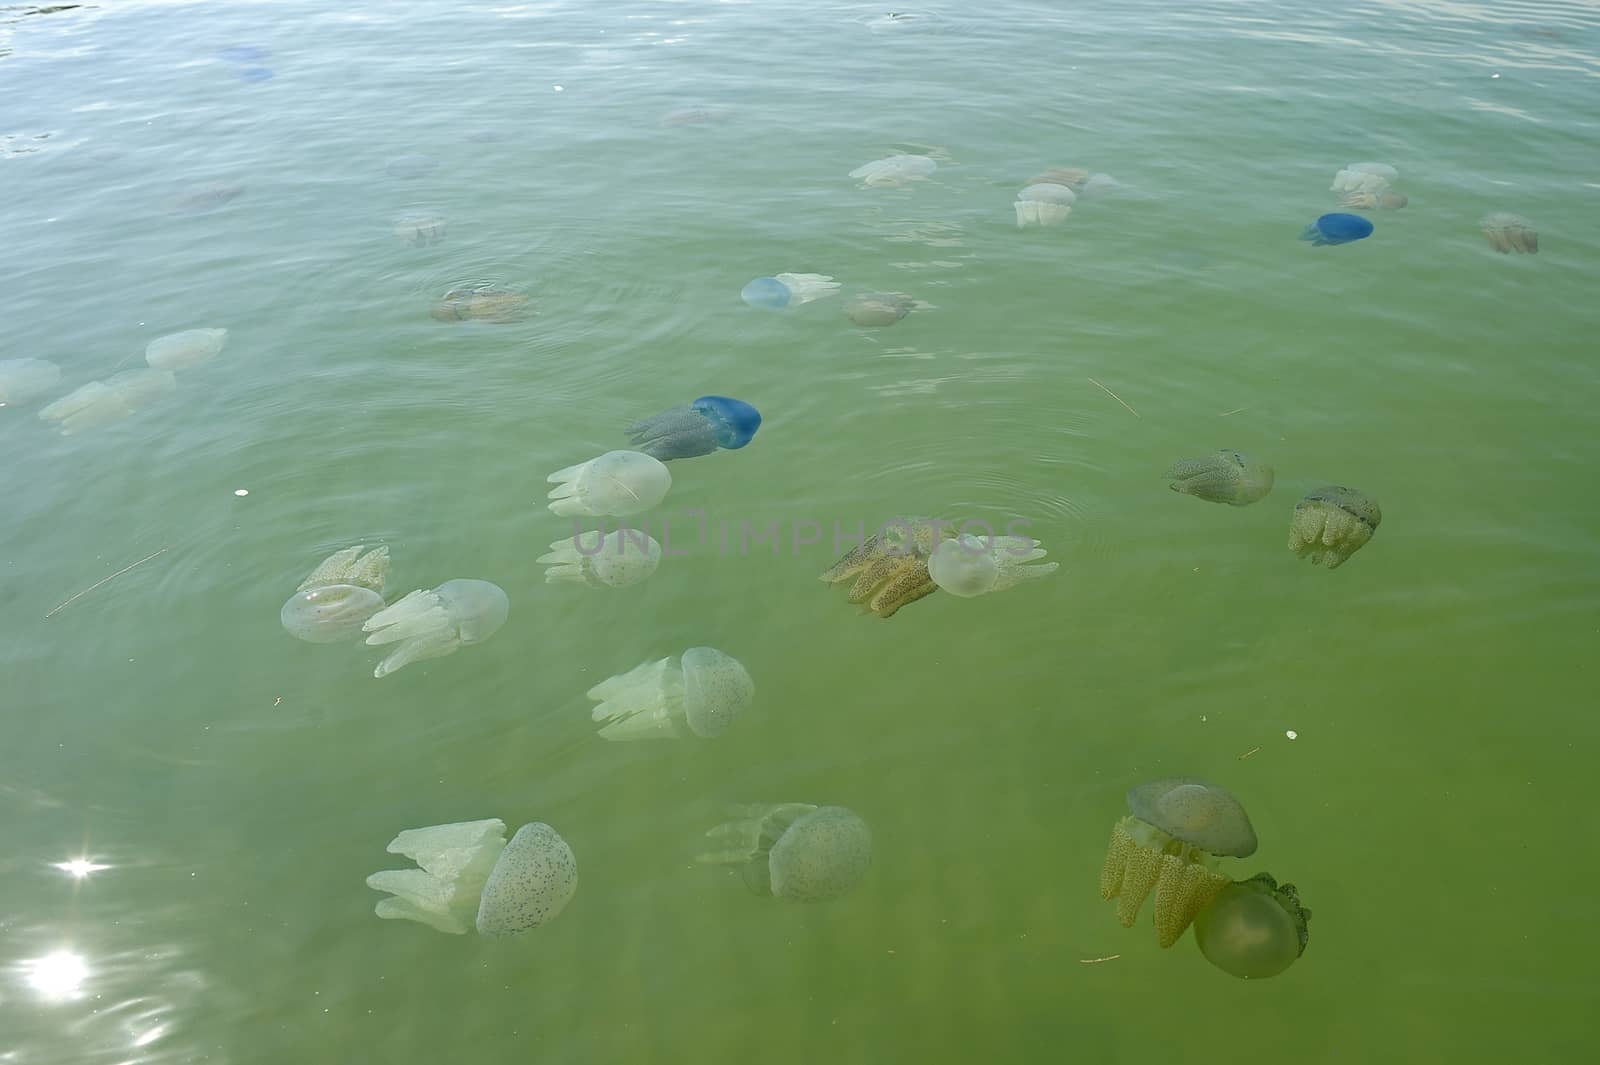 Beautiful sea jellyfish floating in the sea of Thailand